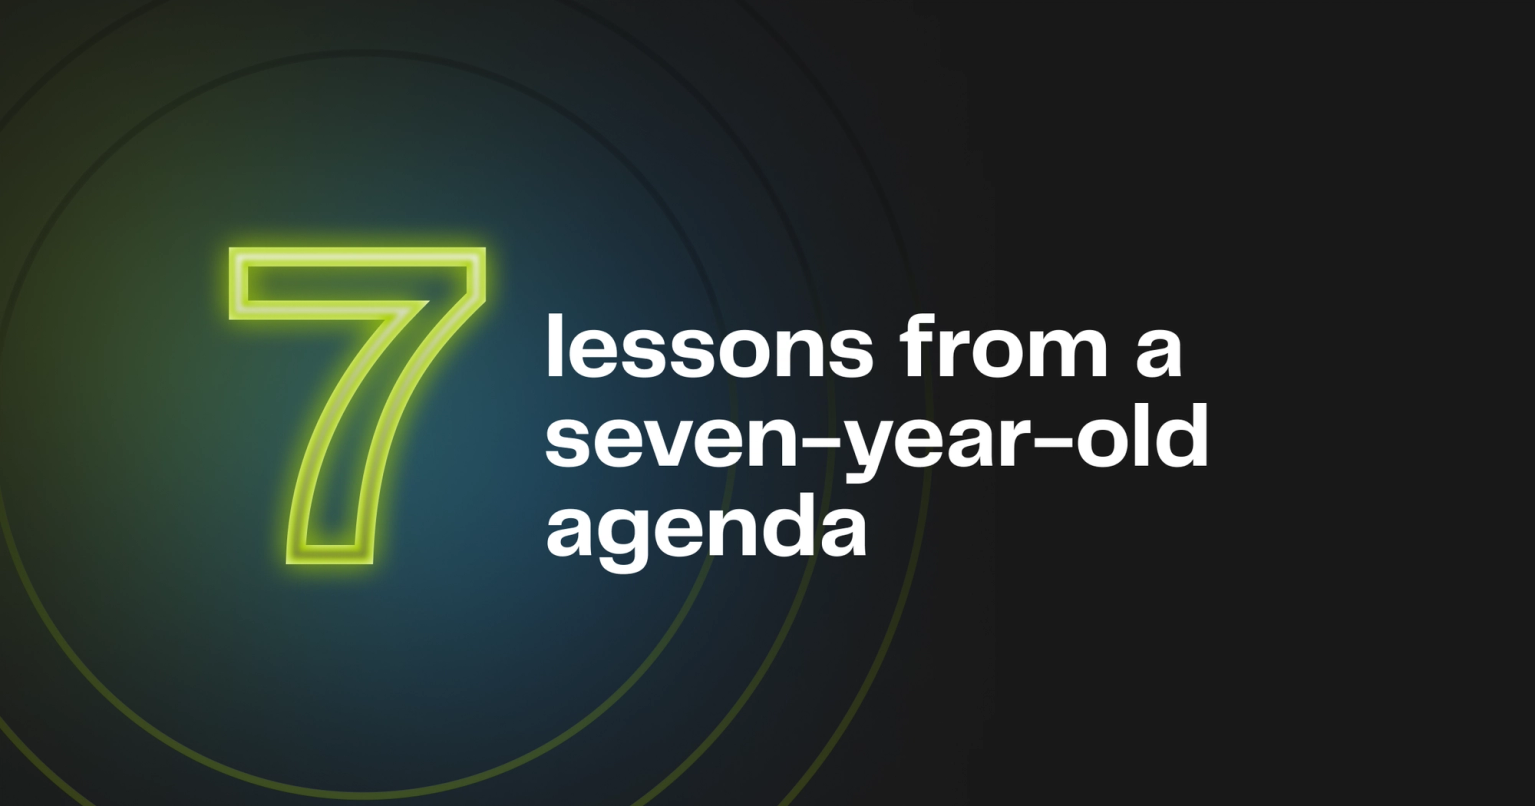 Seven lessons from a seven-year-old agenda